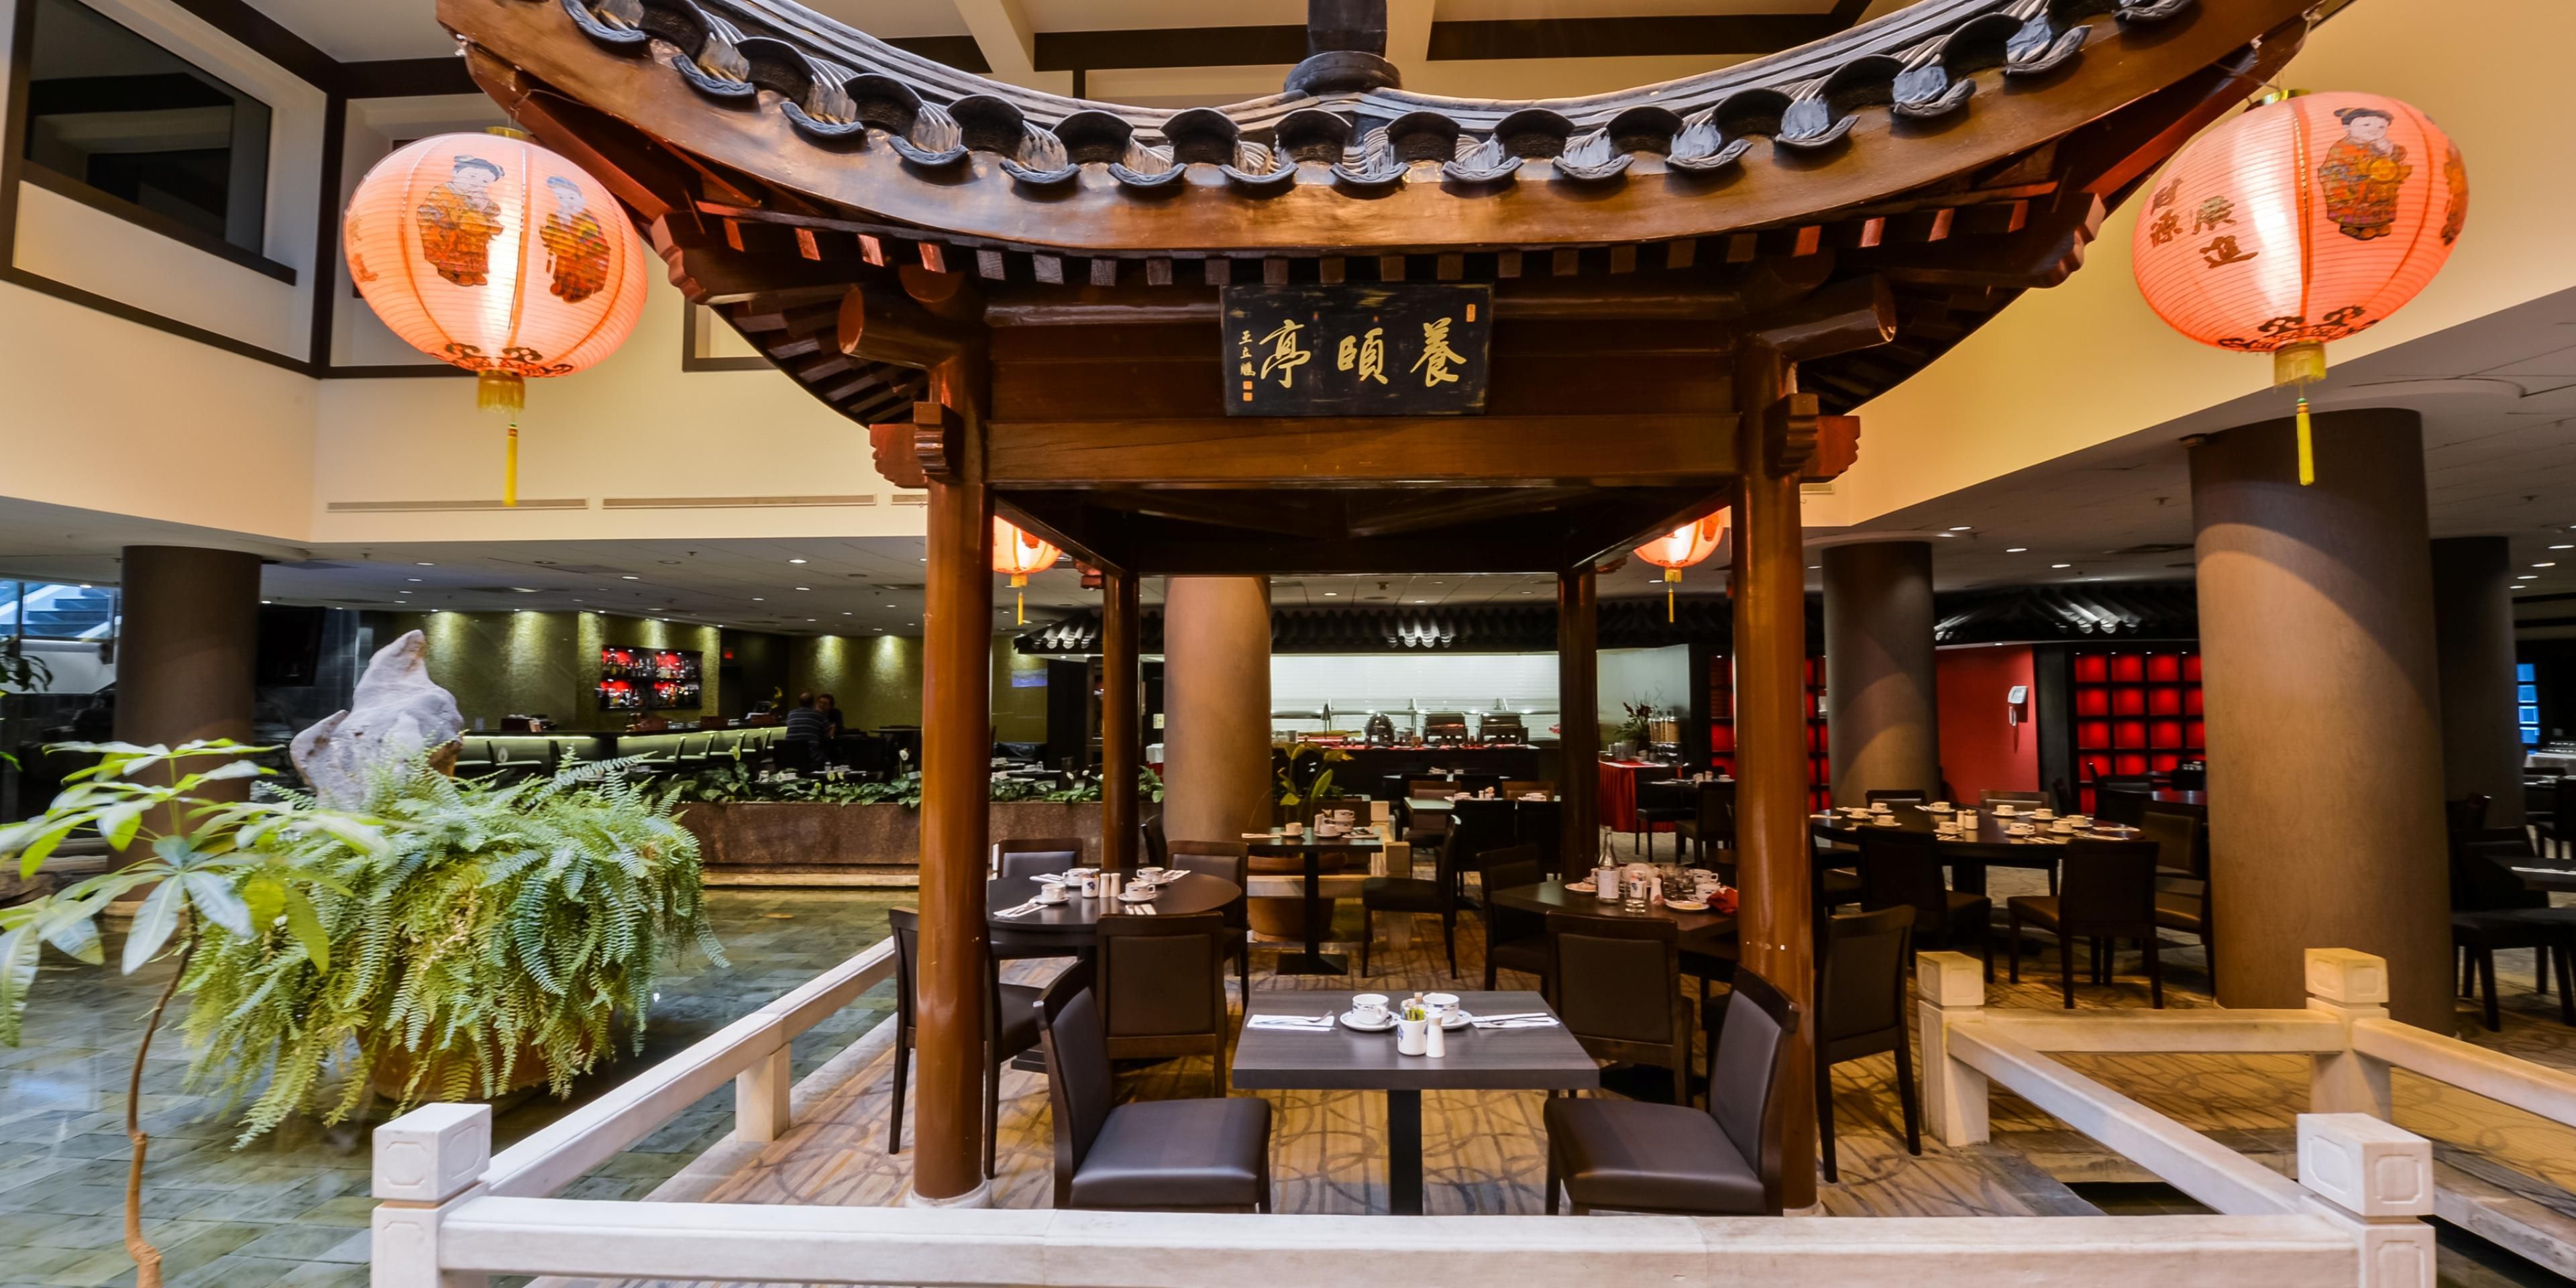 Our zen restaurant is located on the second floor